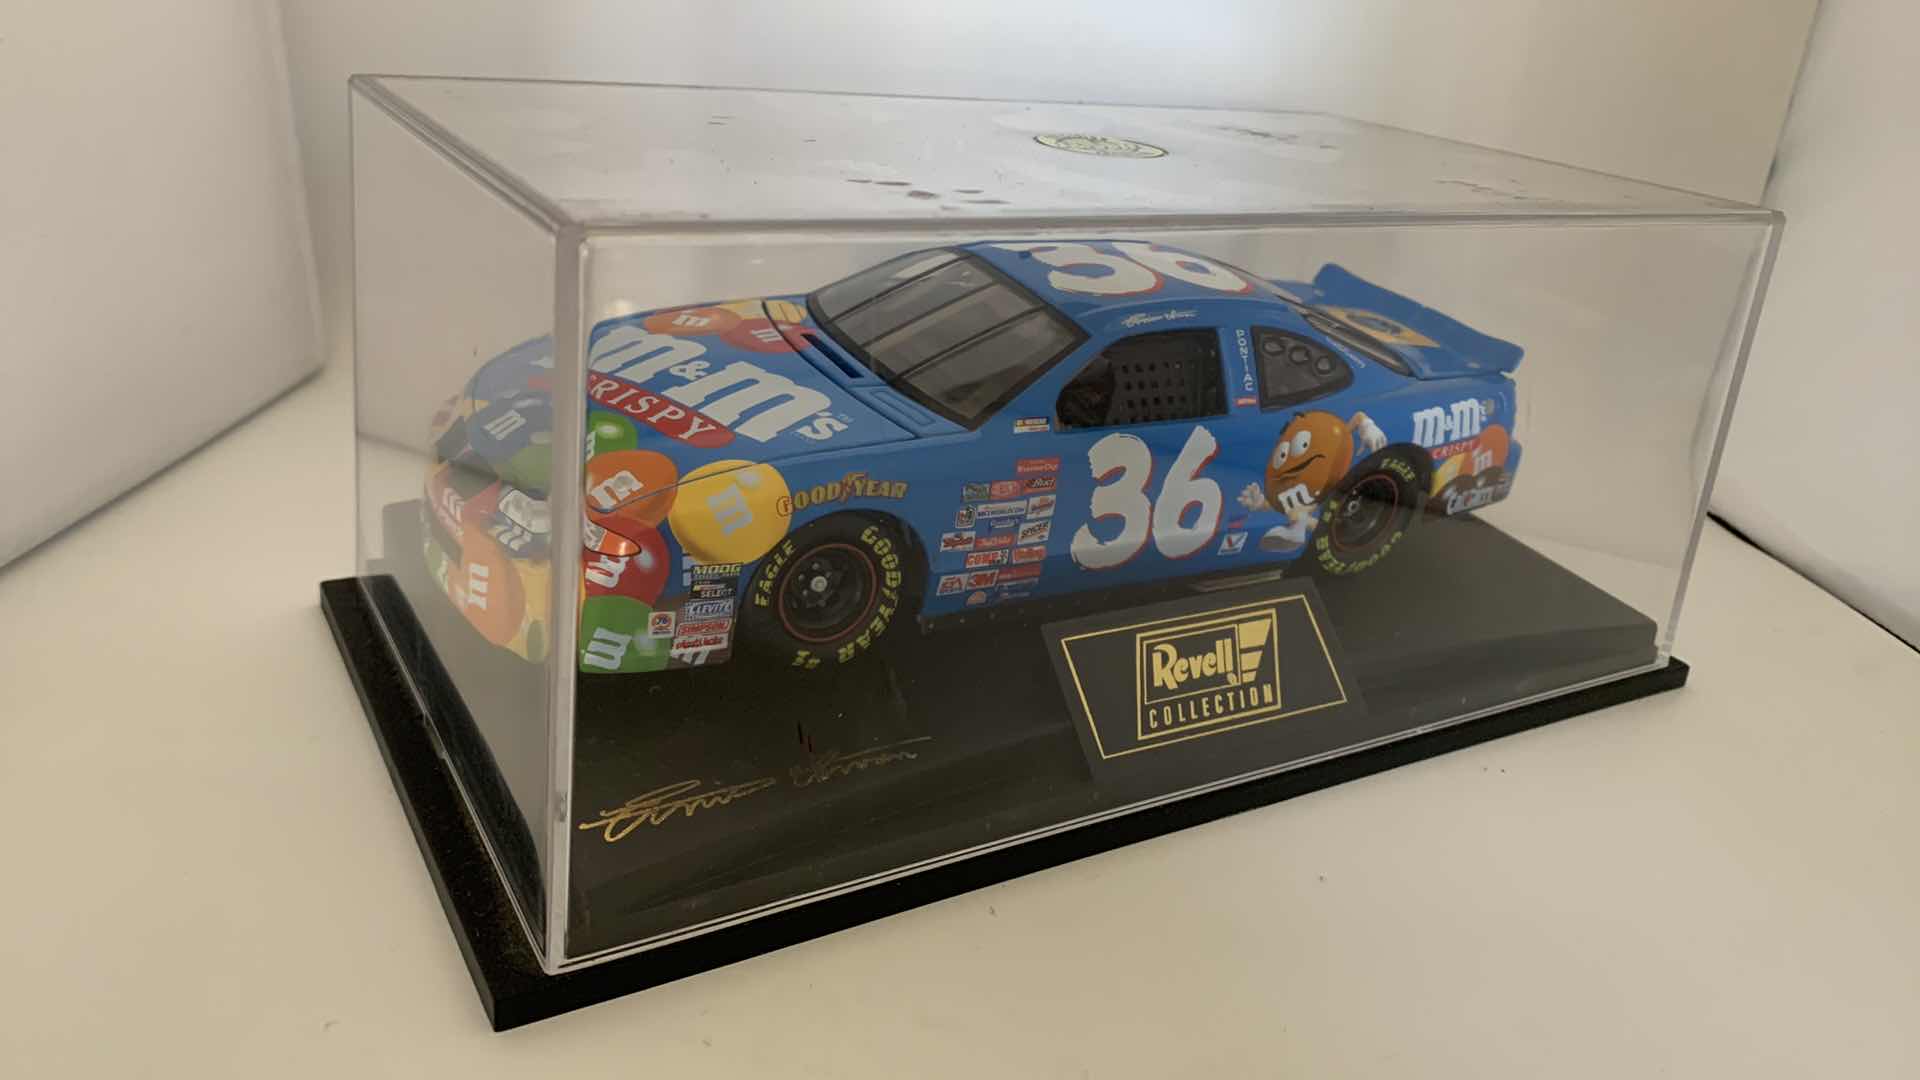 Photo 2 of M&M #36 REVELL COLLECTION ERNIE IRVAN DIE CAST CAR IN SHOW CASE.